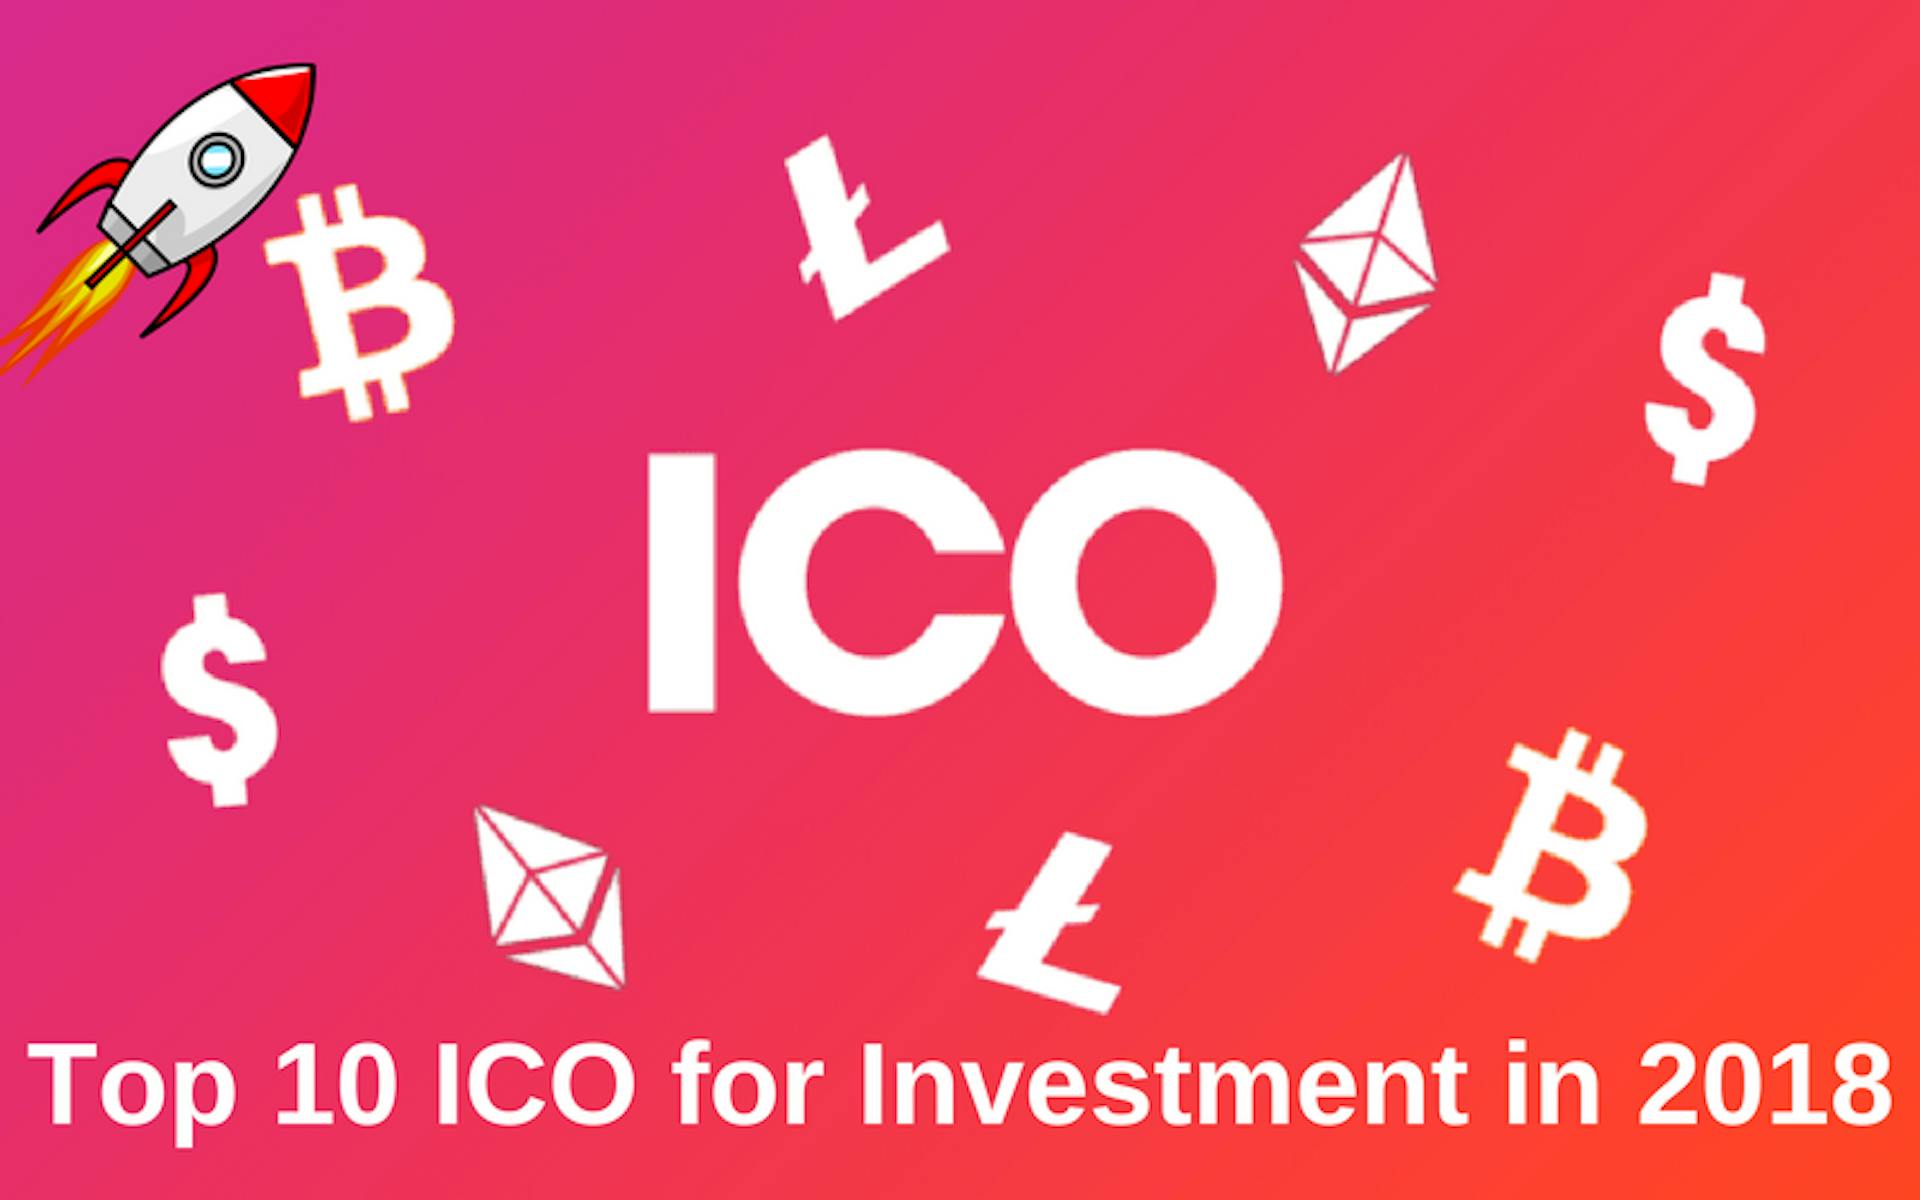 featured image - Top 10 ICO for Investment in 2018